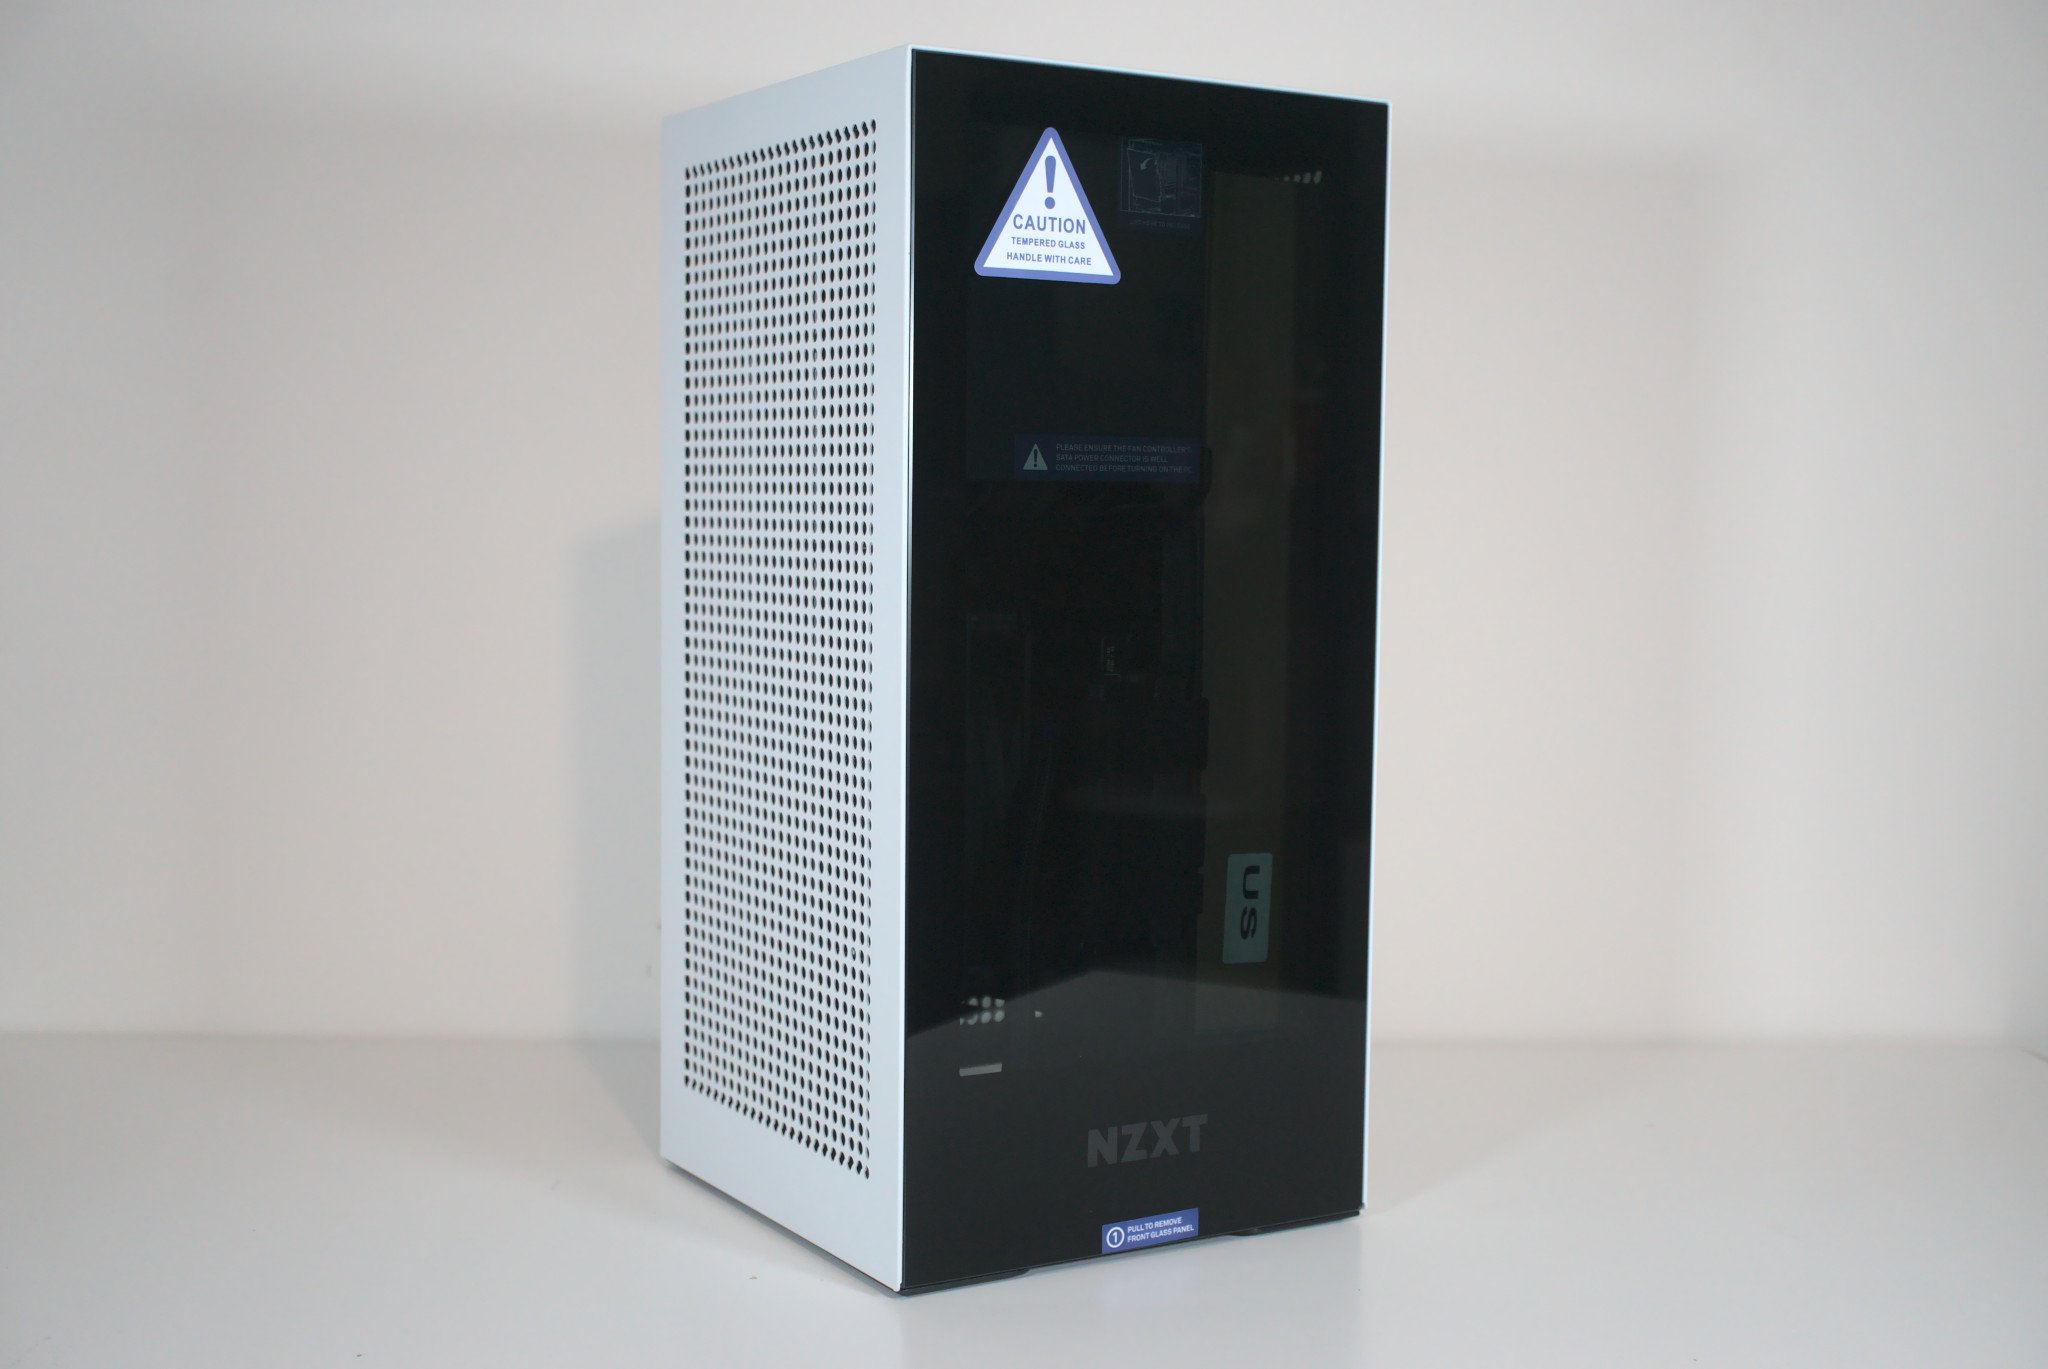 Nzxt NZXT Reviews